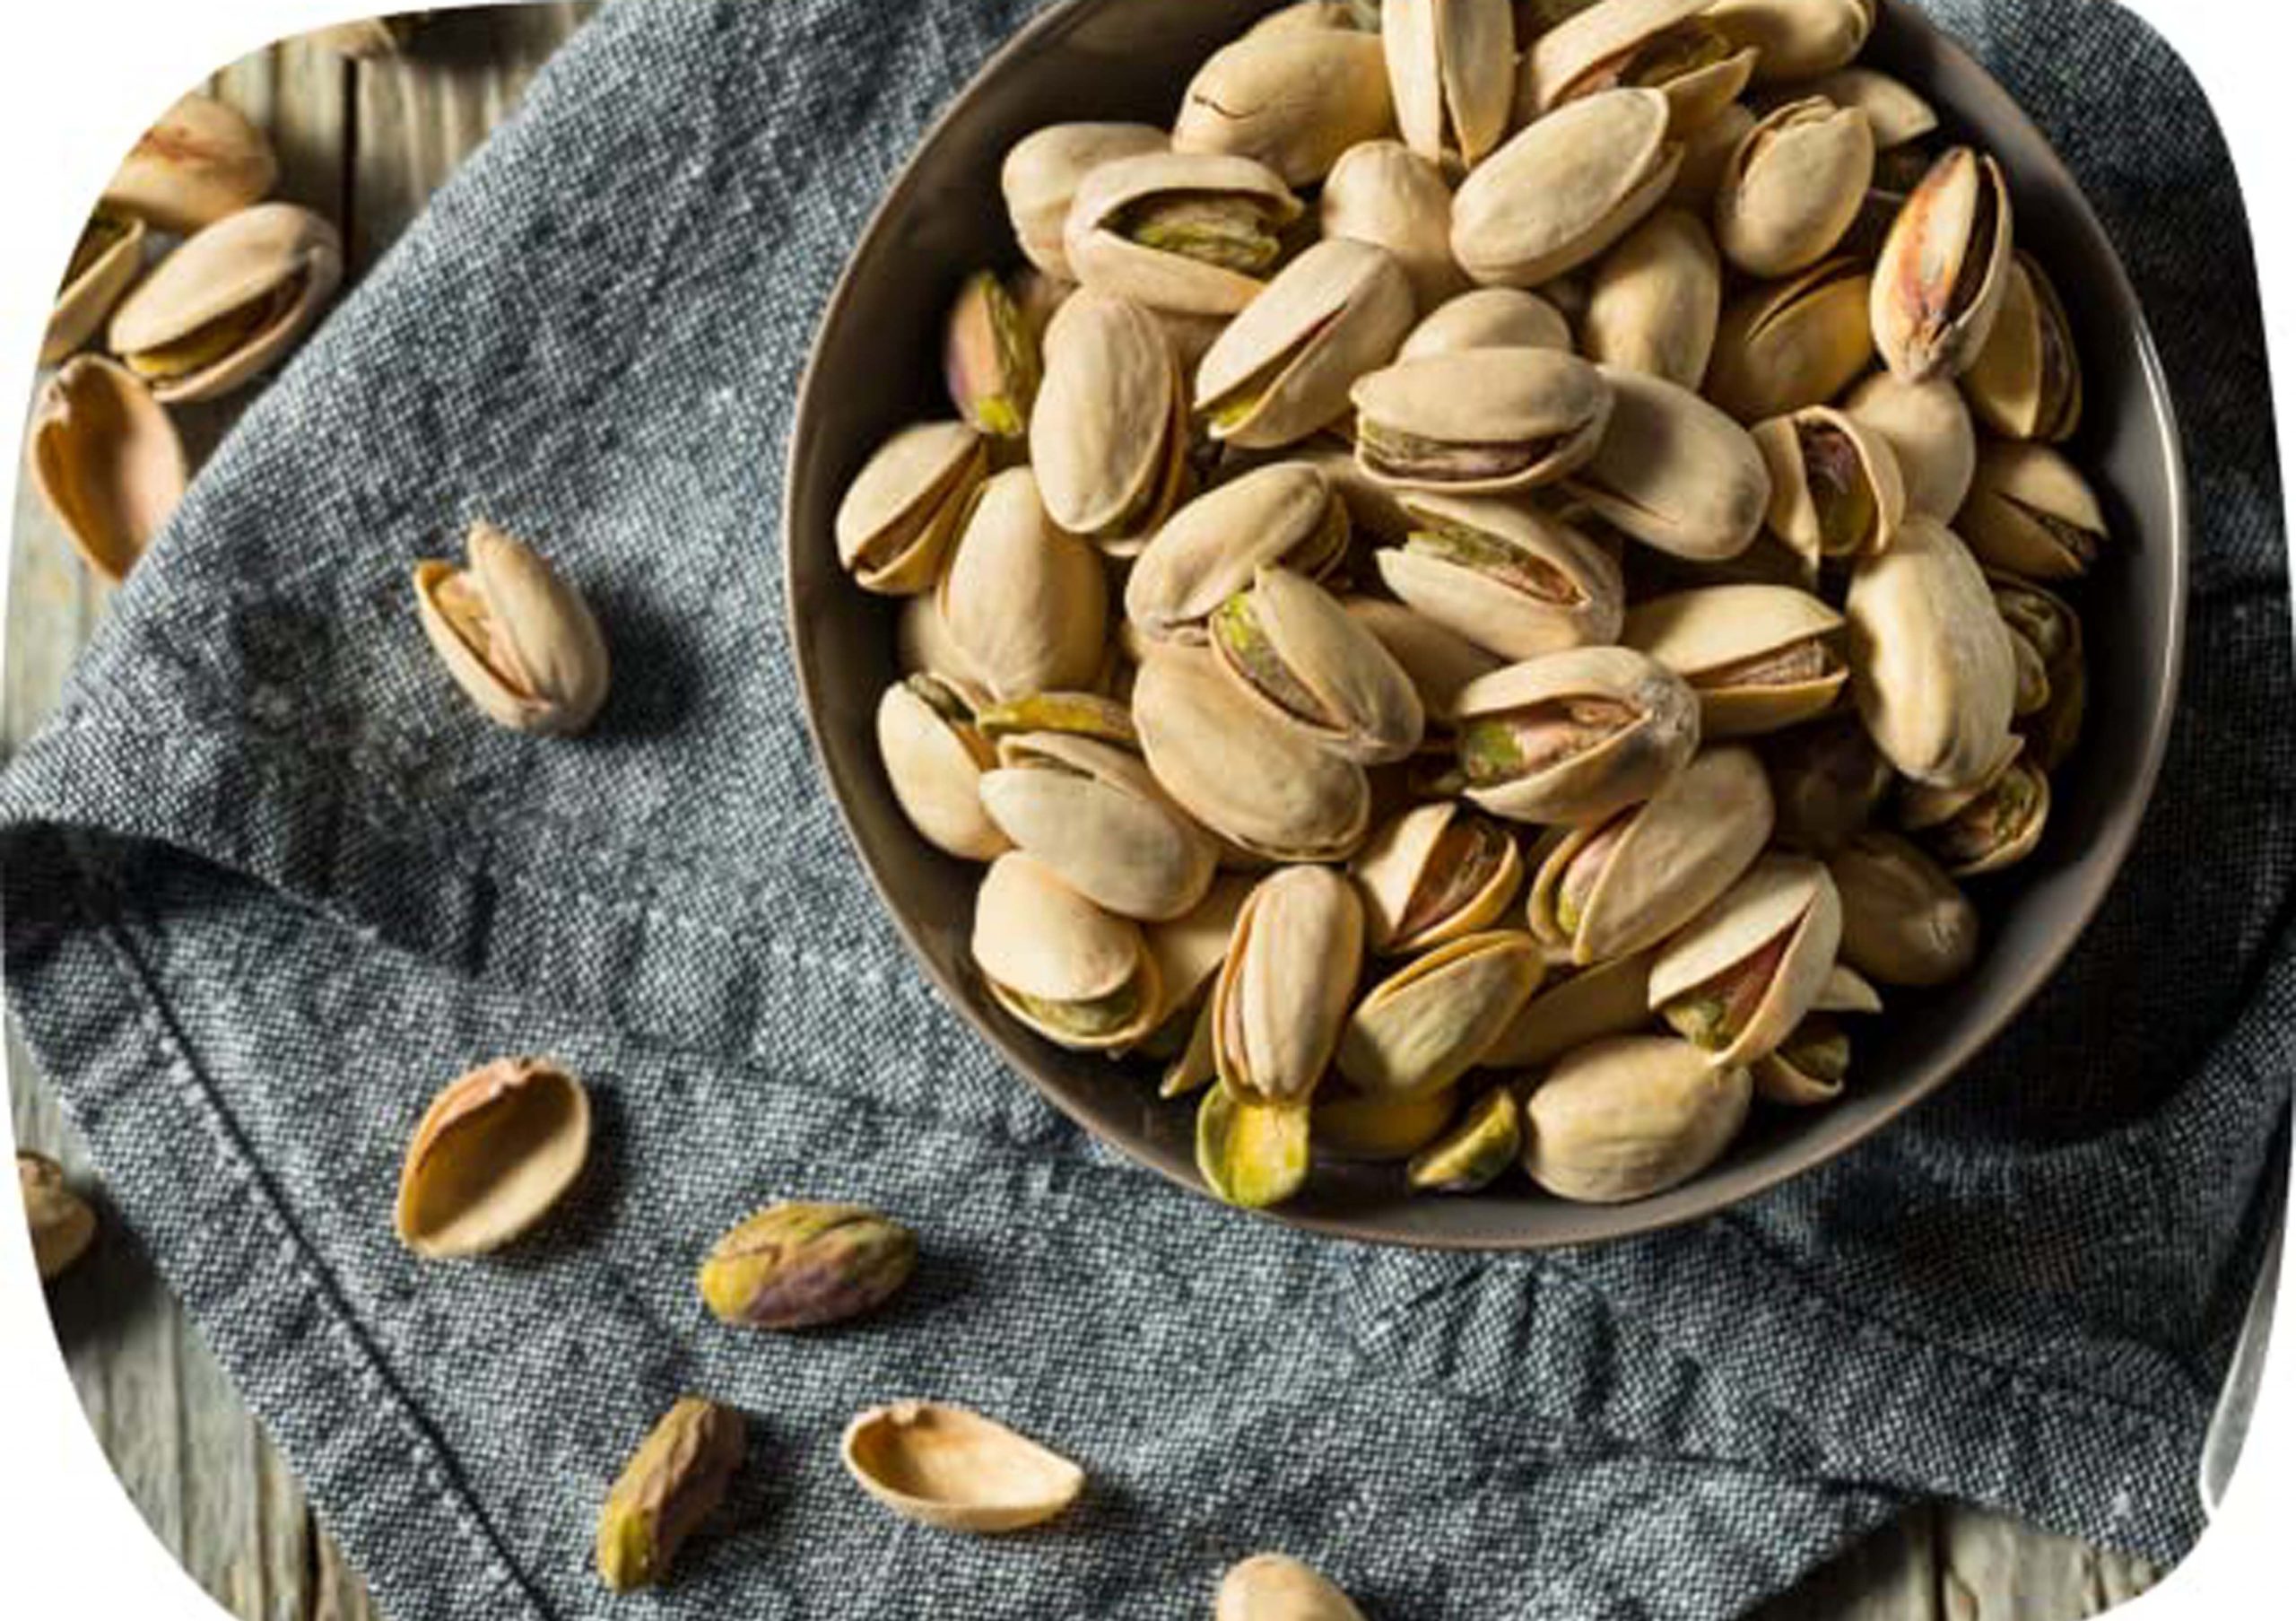 Buy High-quality Pistachio Online at the Best Price - Nutex Company